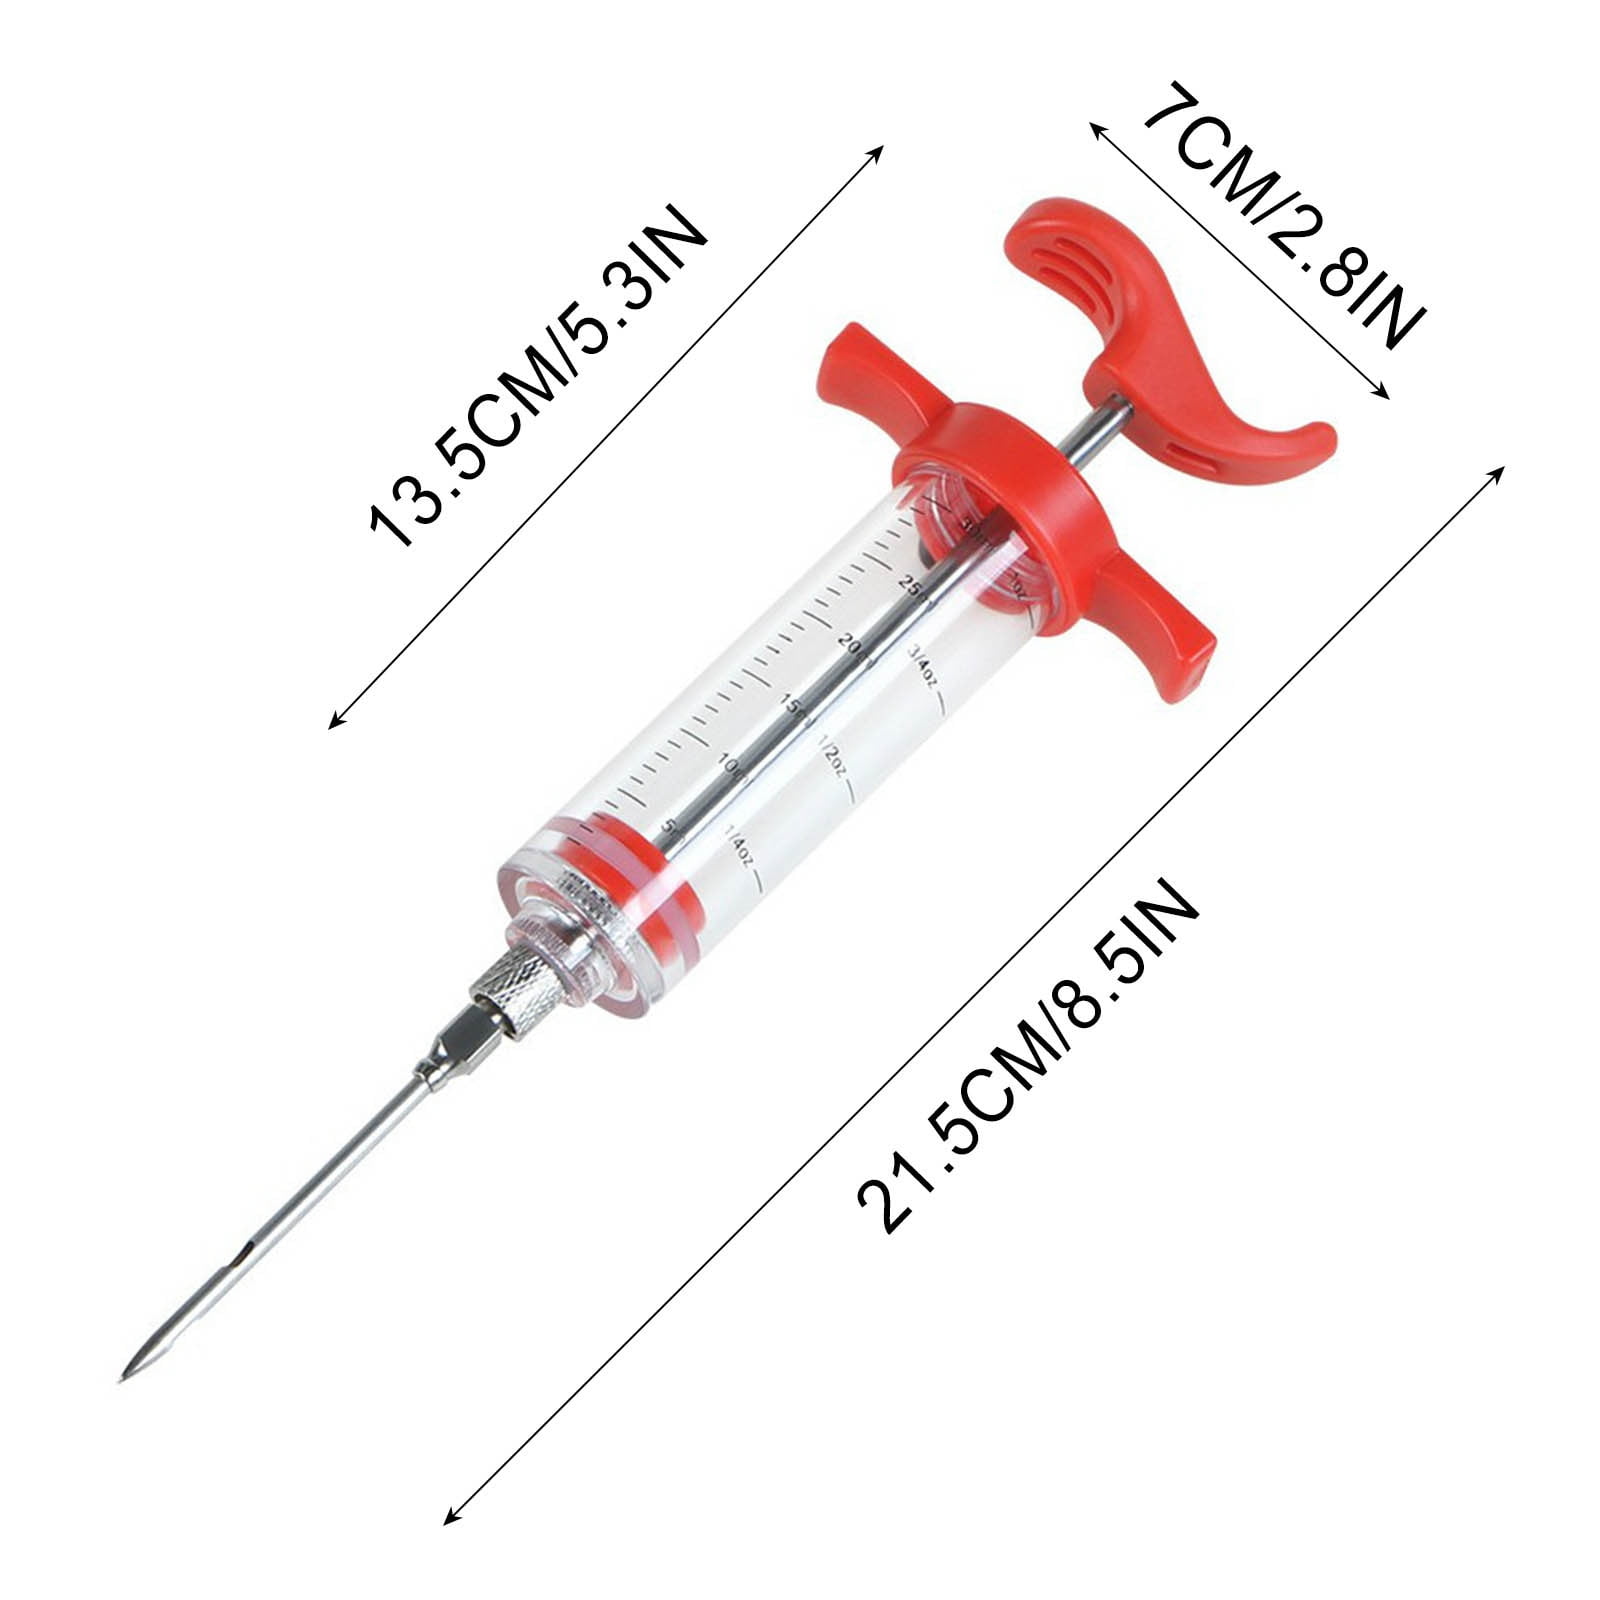 Restaurantware Met Lux Meat Injector Kit, Professional Food Injector Syringe Kit - 2 Ounce Syringe, 3 Needles, Stainless Steel Meat Injector Set, 2